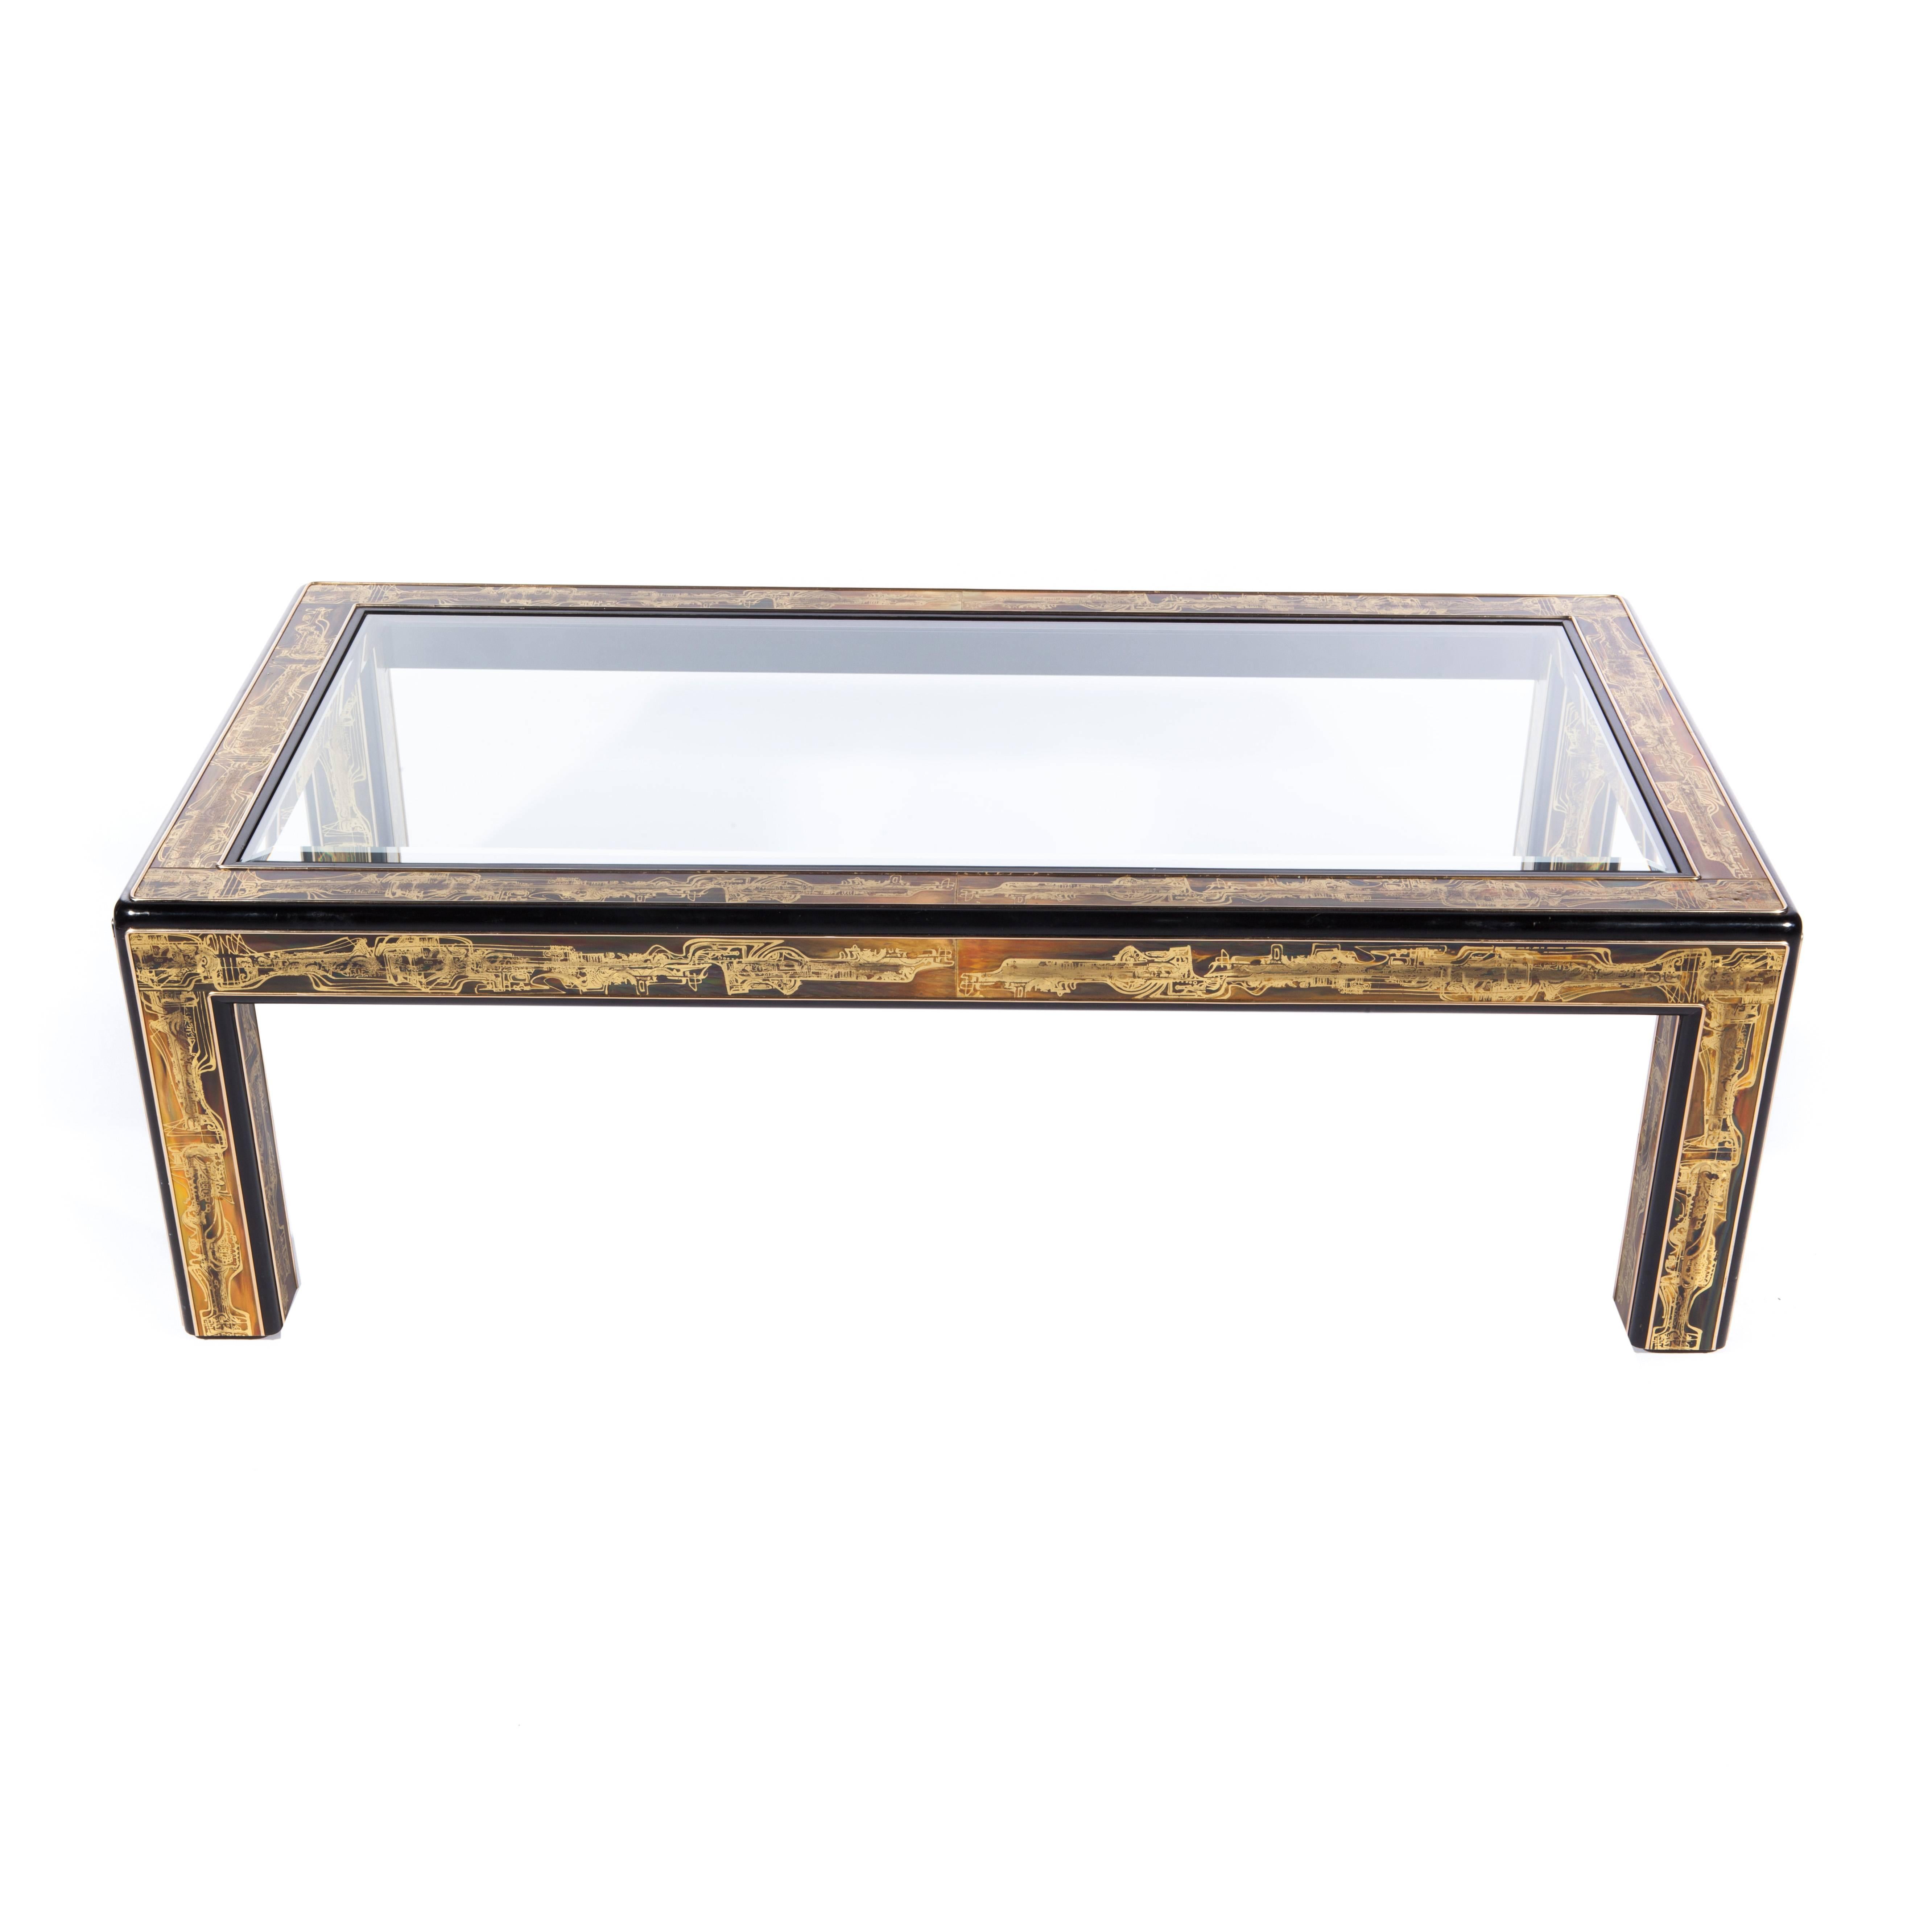 Parsons-style 1970s coffee table features black lacquered-wood frame with inset acid-etched brass panels with polished-brass trim. Beveled-glass top. Designed and executed by Bernhard Rohne for Mastercraft. 

See this item in our Brooklyn showroom,